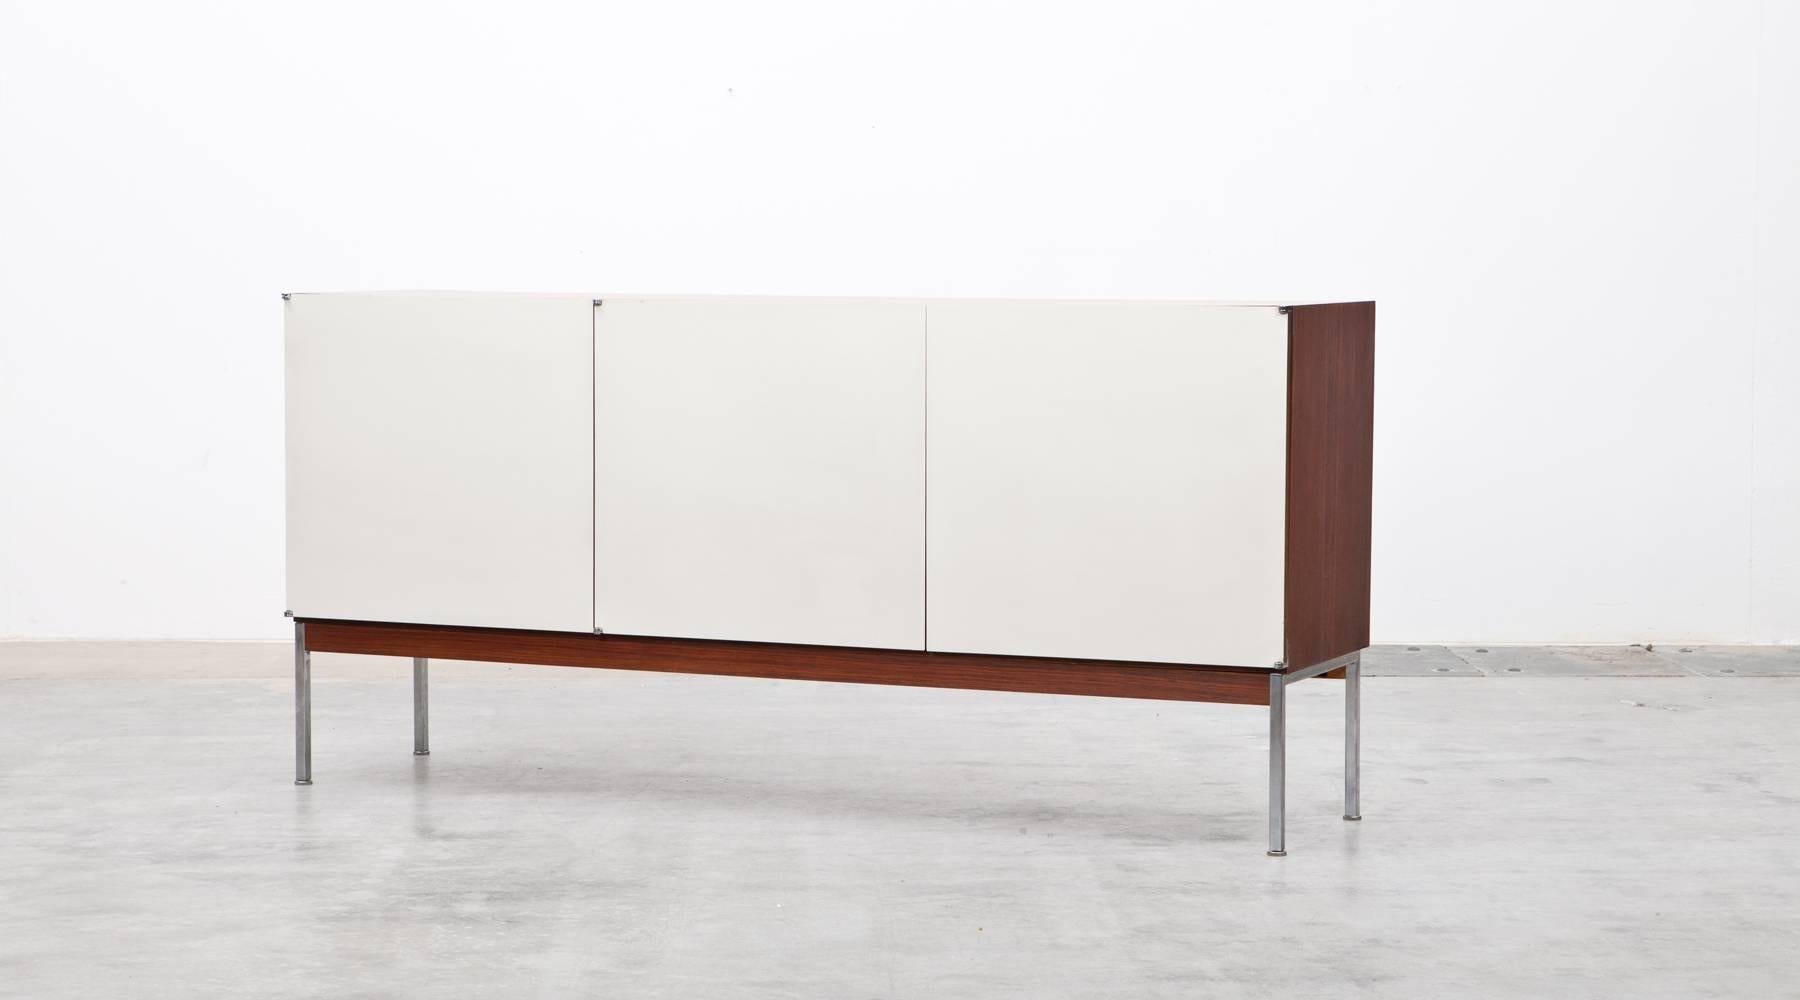 Sideboard with three white laminated doors designed by Antoine Philippon and Jacqueline Lecoq. The corpus is rosewood, the inlay features a big storage area with shelves on one side and additional four drawers on the other side. Manufactured by